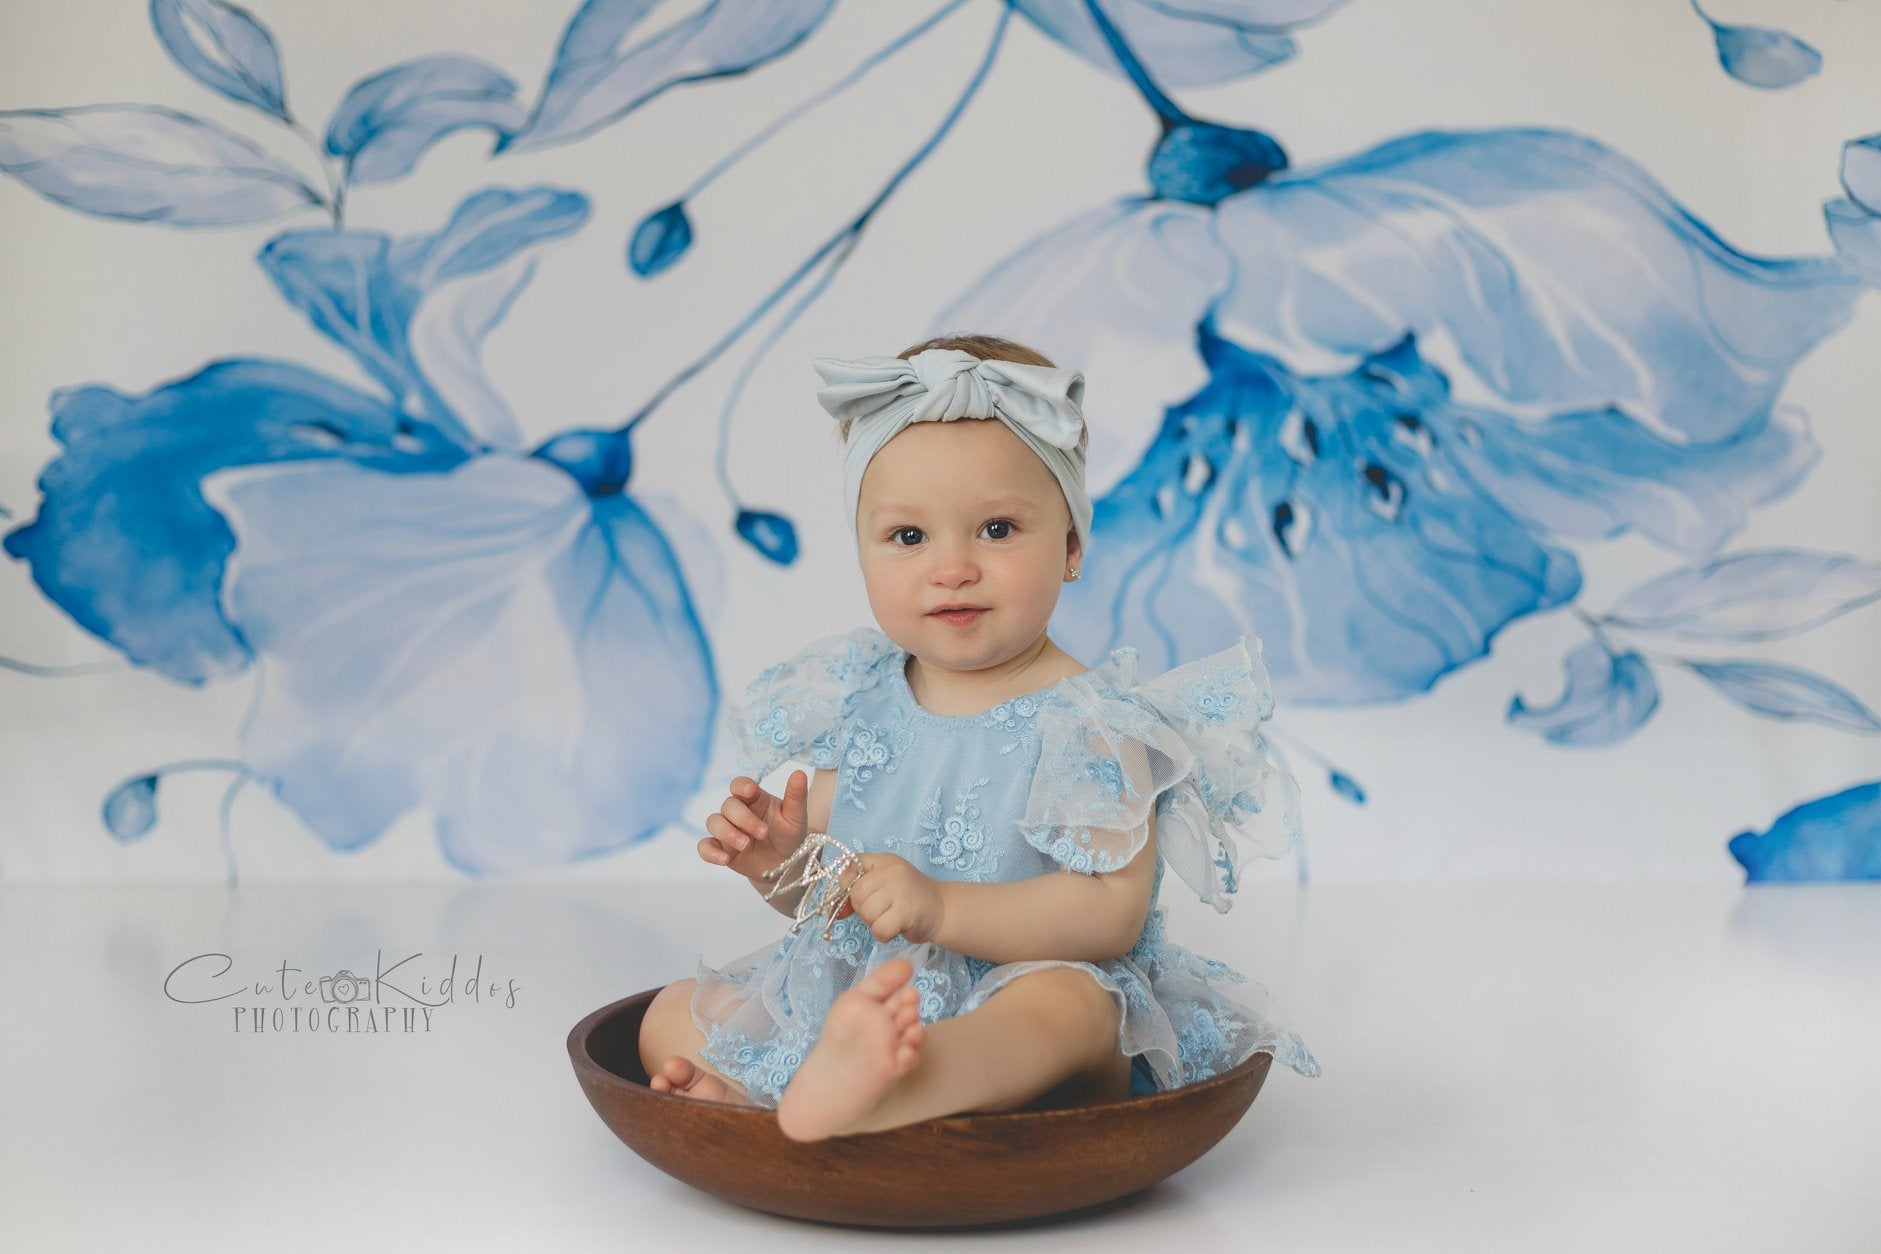 Kate Retro Blue Flower Backdrop for Photography